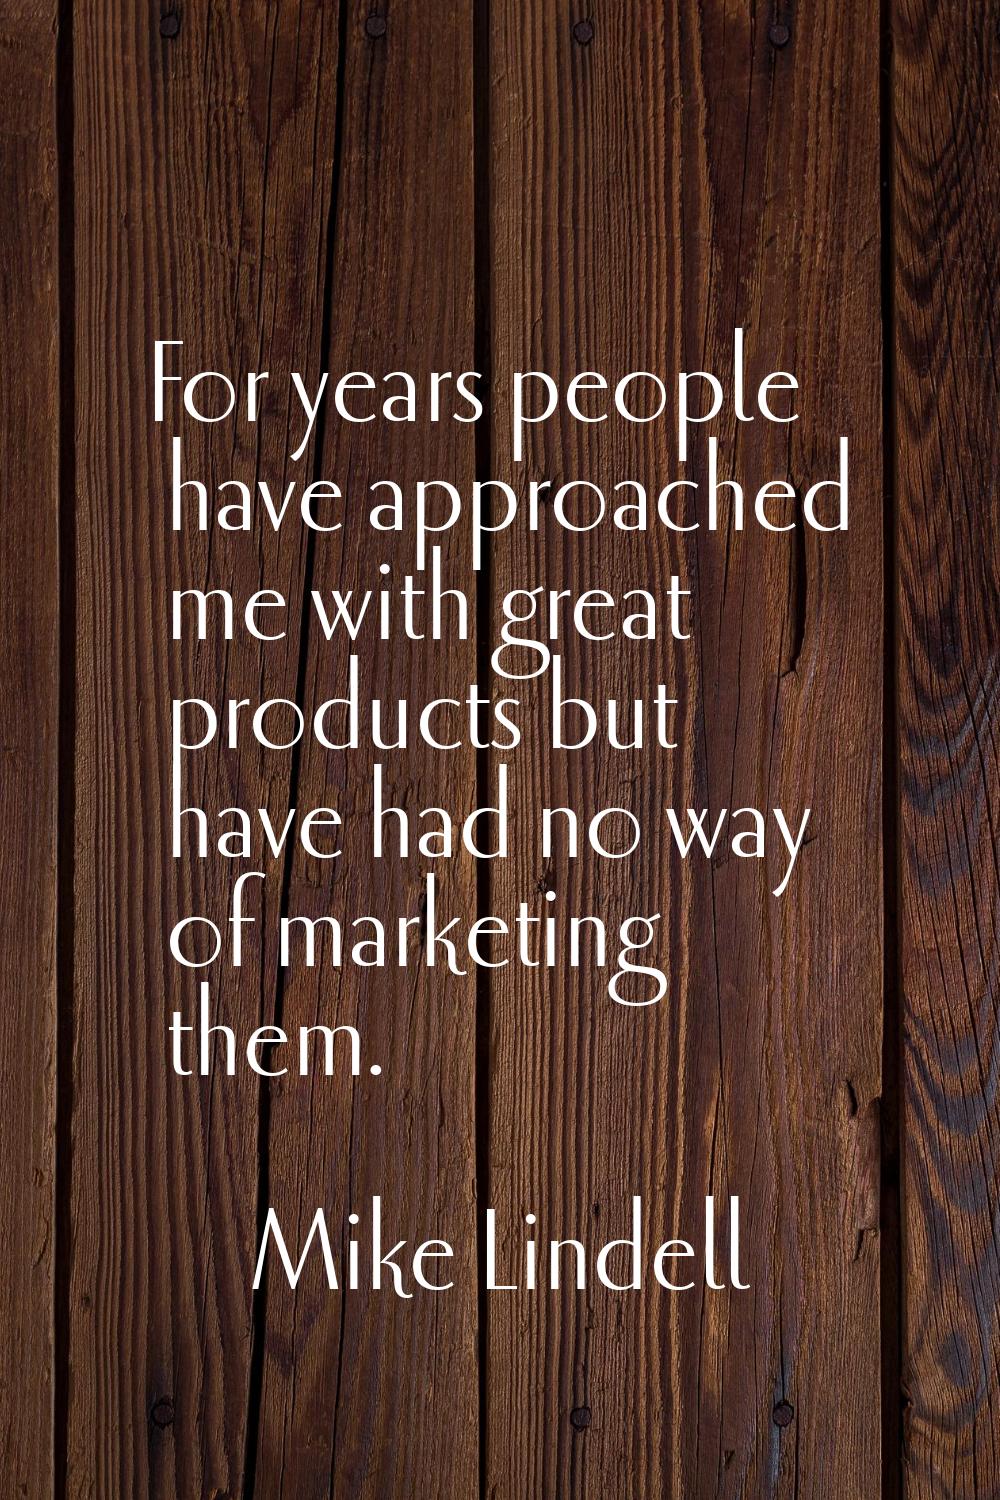 For years people have approached me with great products but have had no way of marketing them.